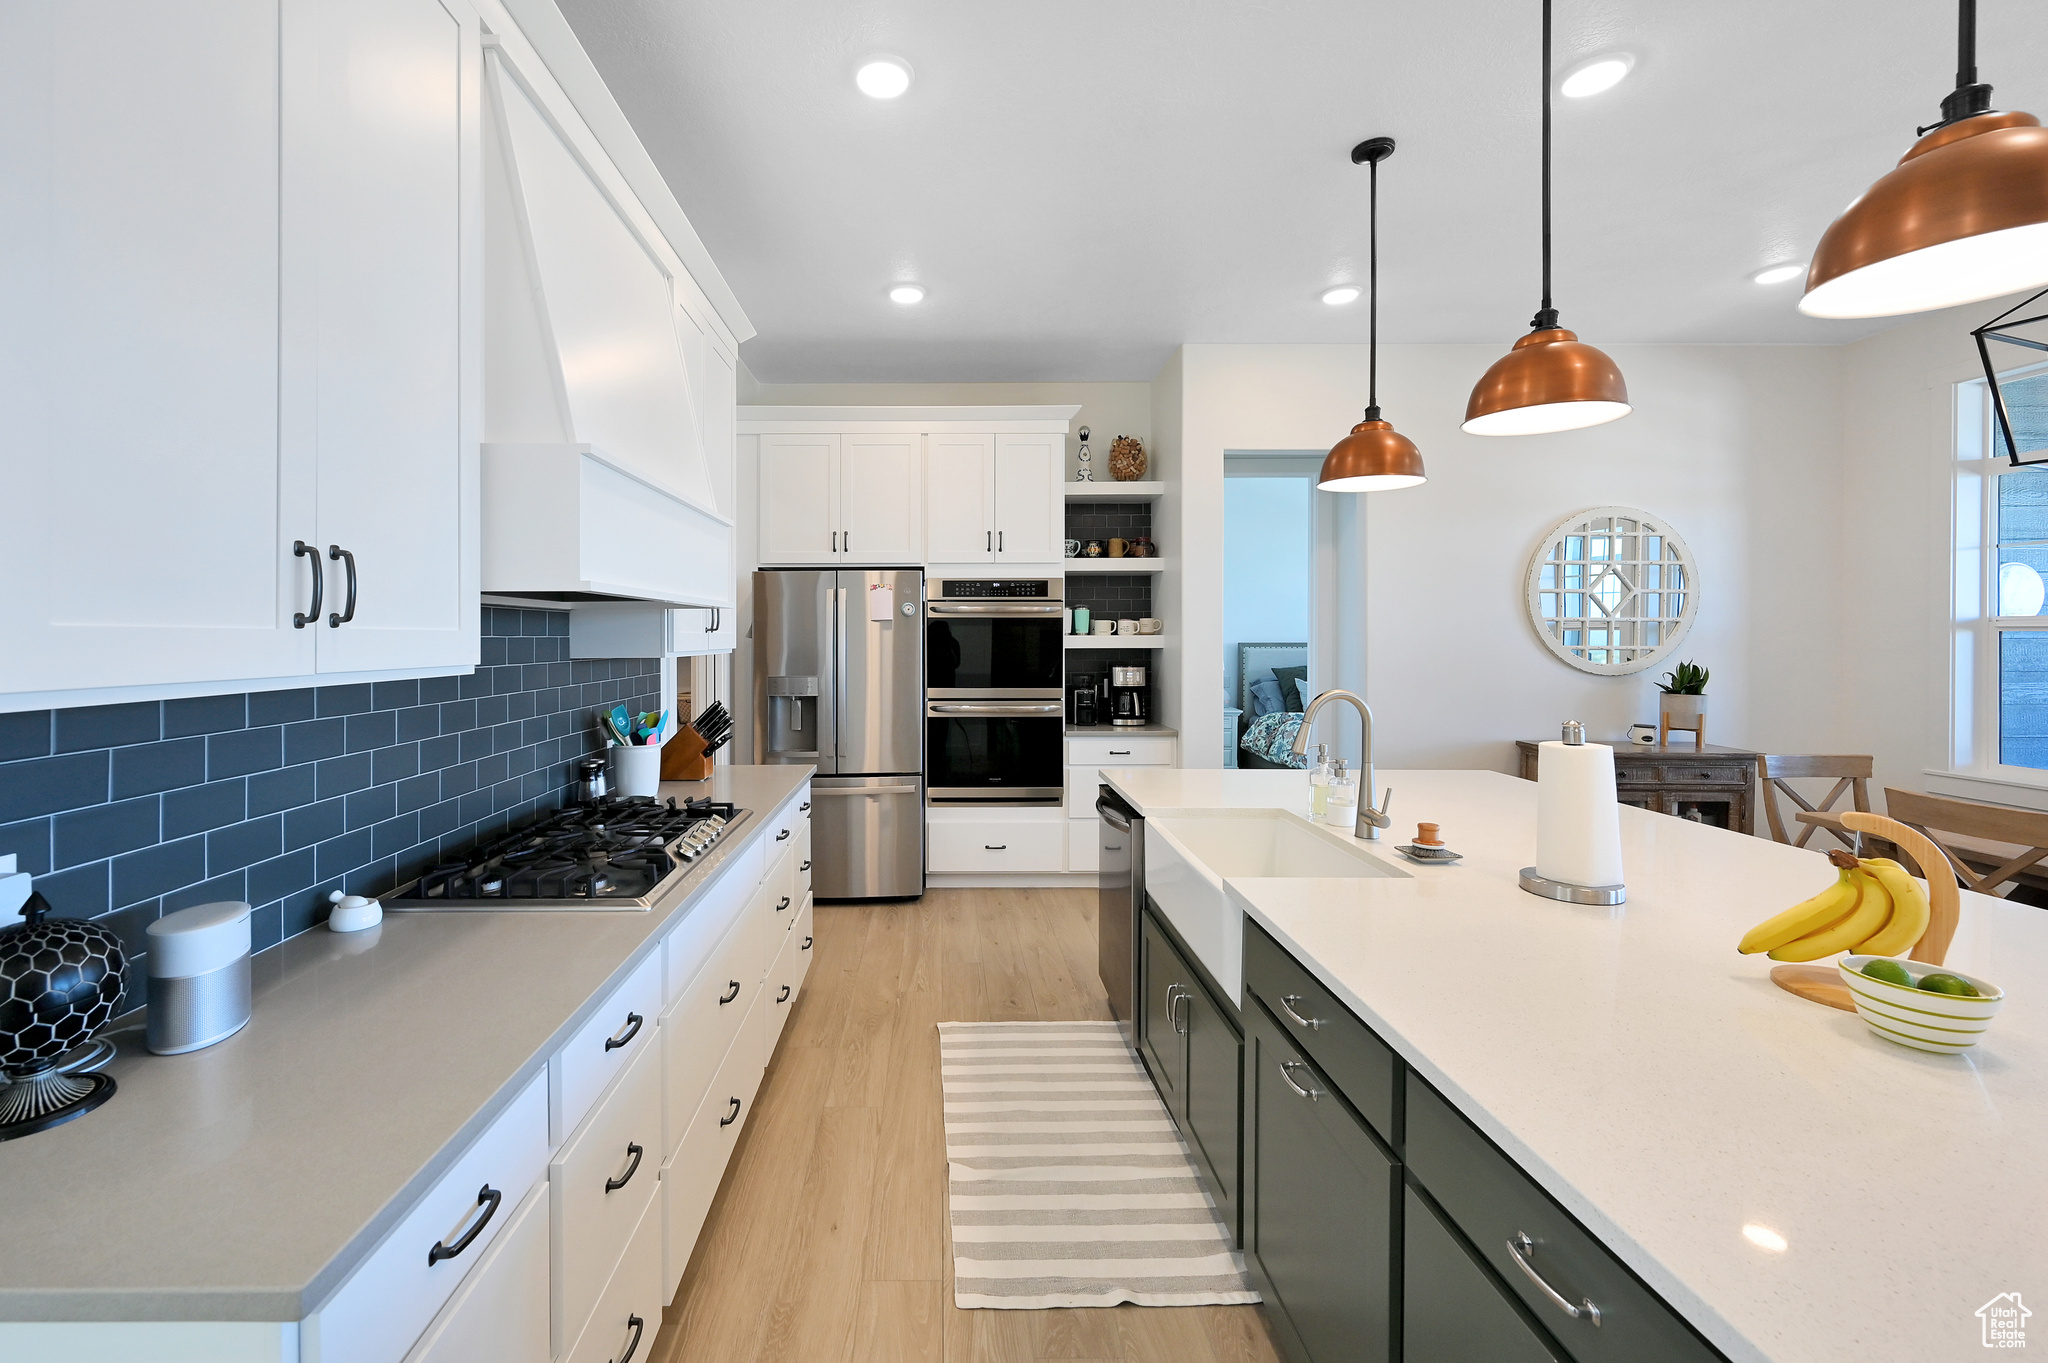 Kitchen featuring decorative light fixtures, backsplash, stainless steel appliances, light hardwood / wood-style floors, and white cabinets